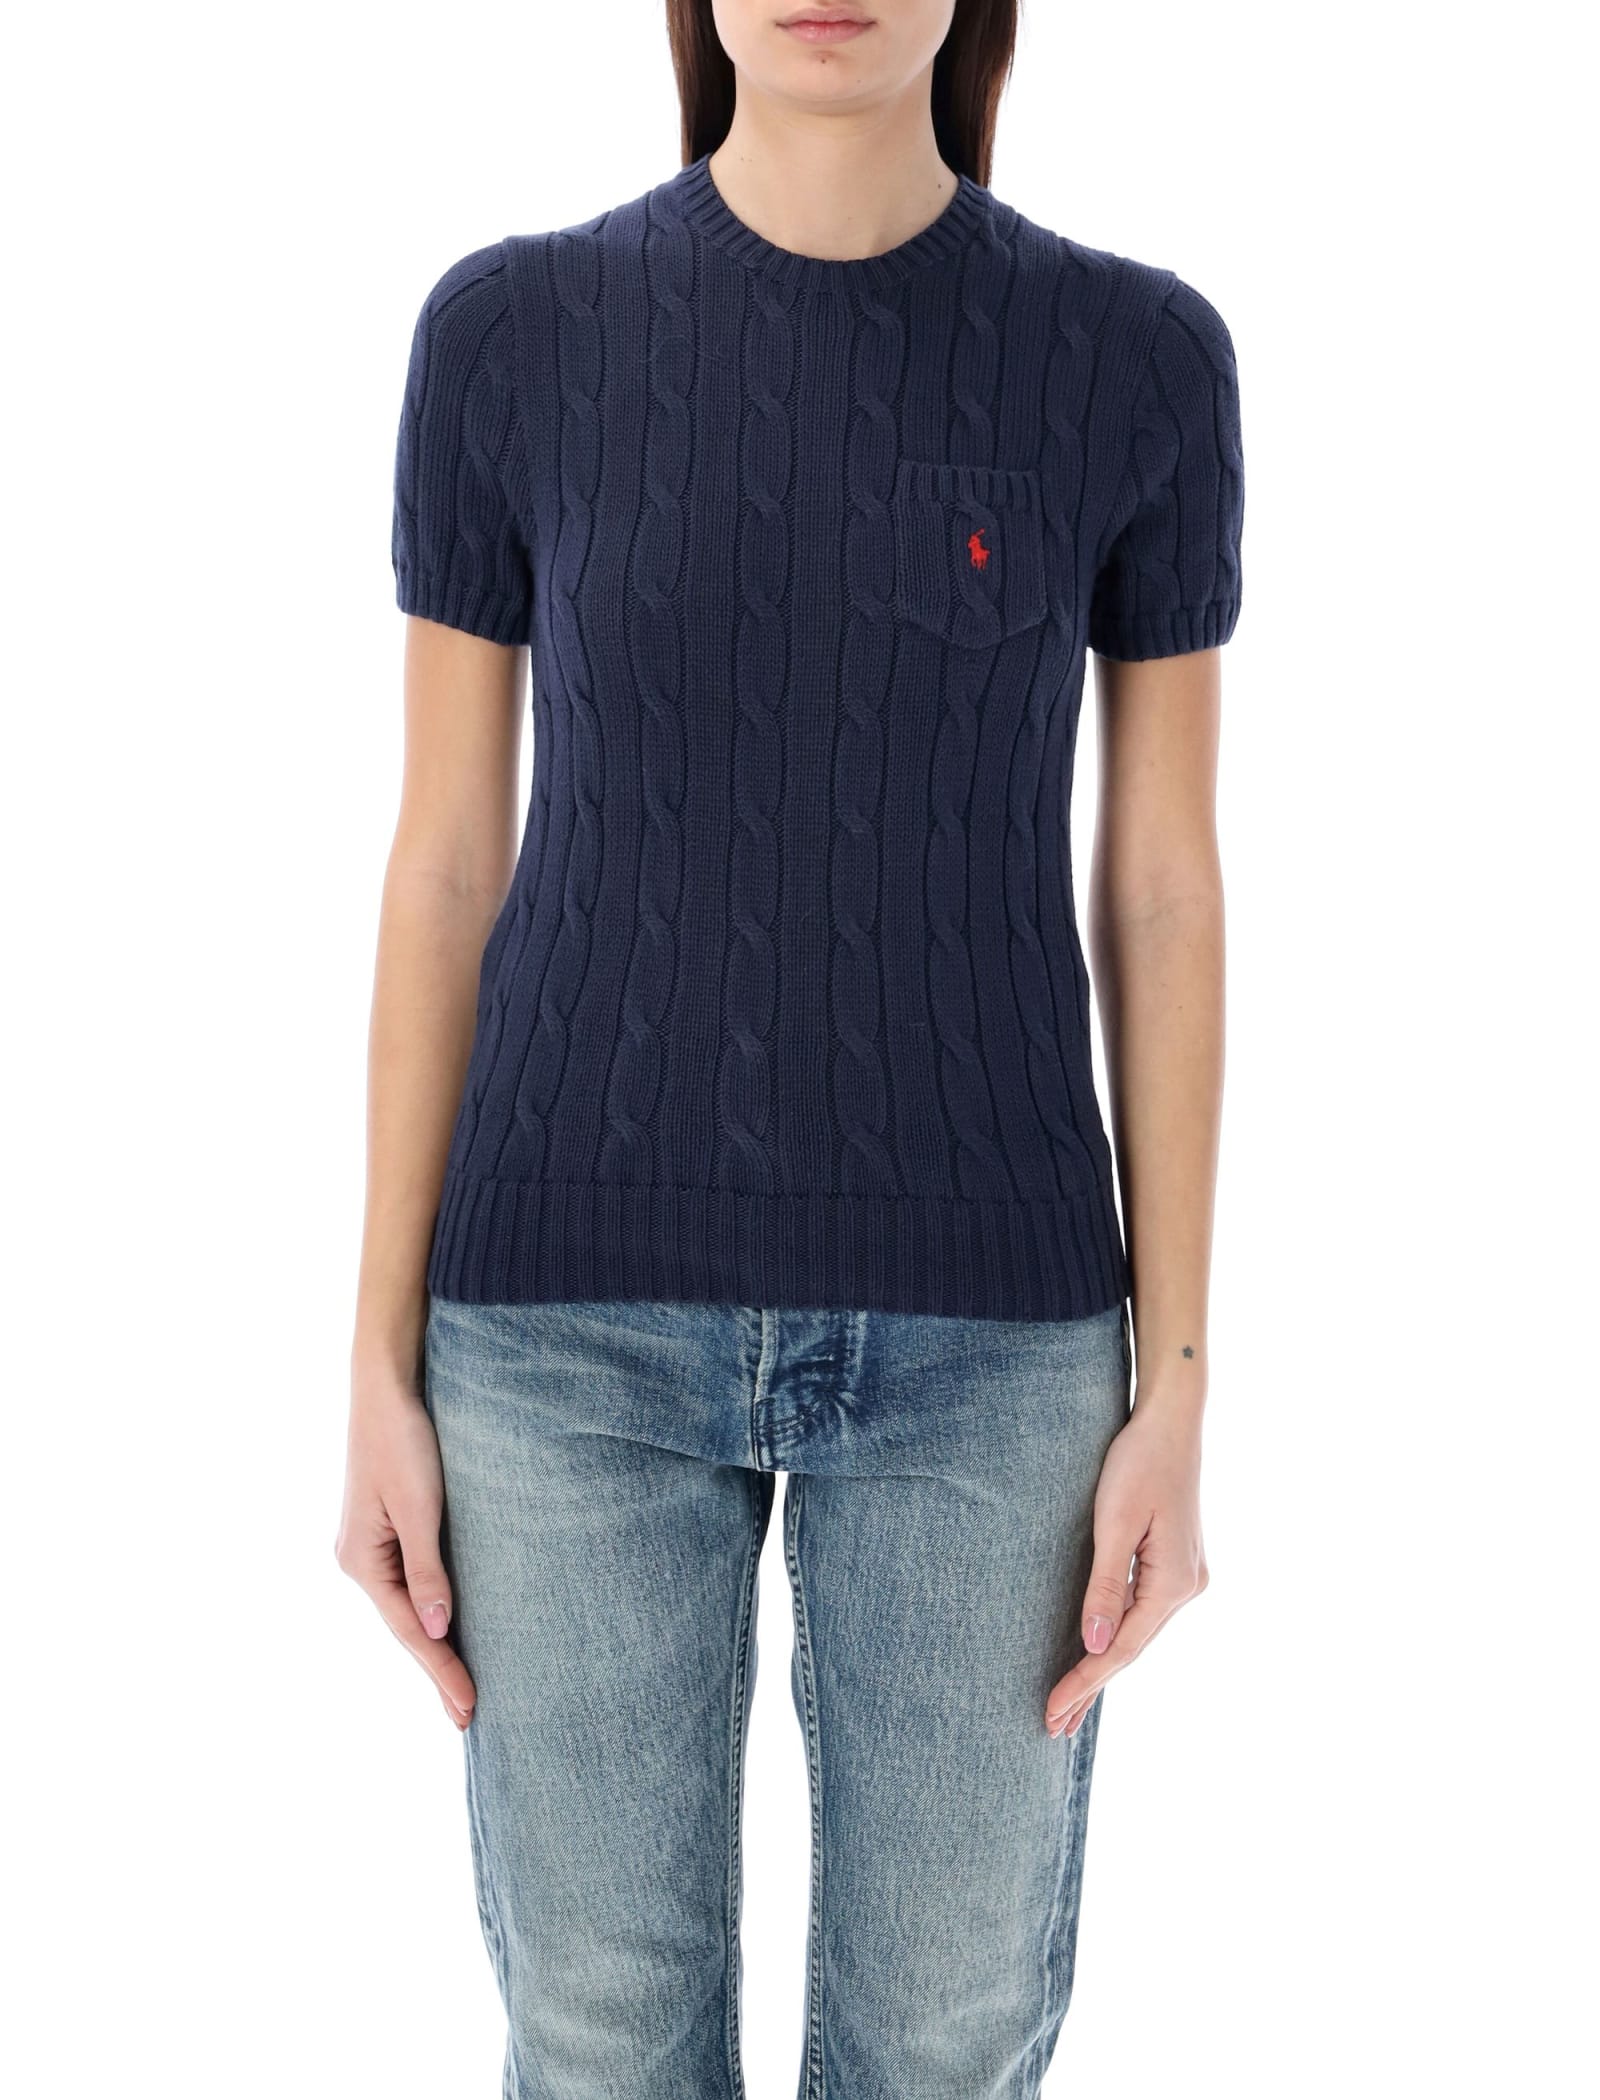 POLO RALPH LAUREN CABLE KNIT SHORT SLEEVES